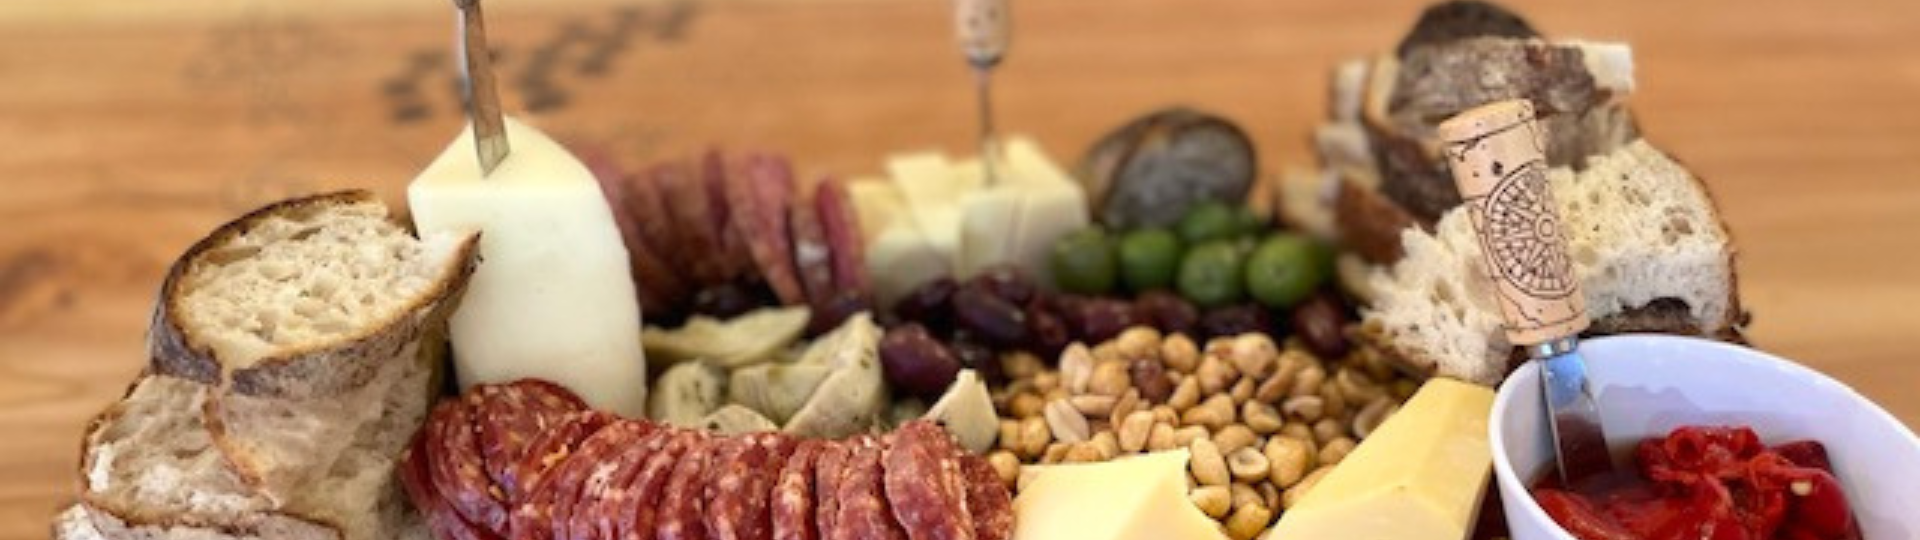 Vine and Barrel charcutier board with cheese, meats, nuts, bread, and jam.